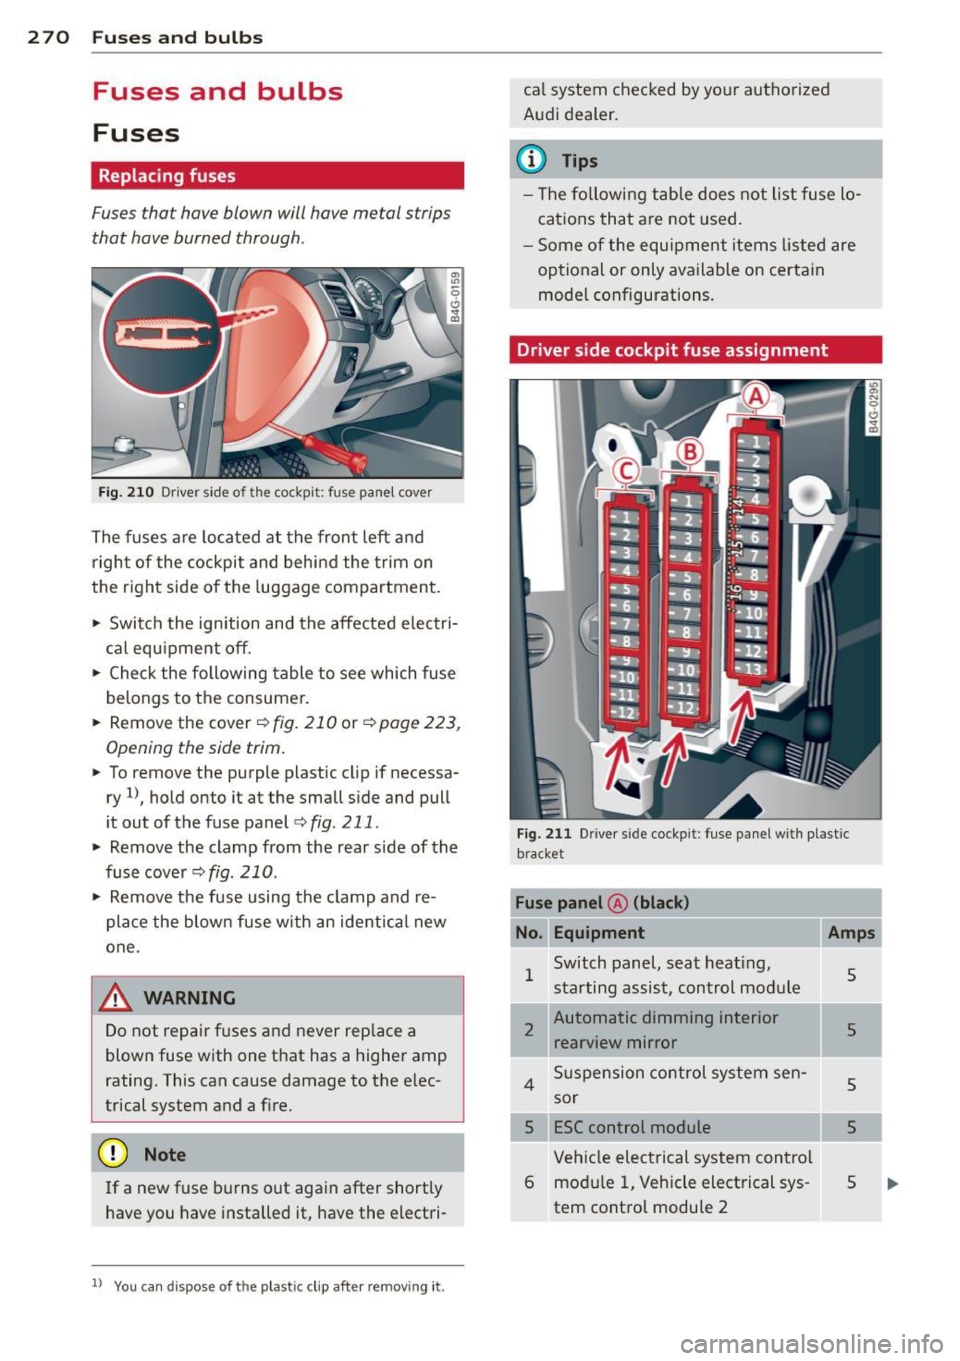 AUDI S6 2013  Owners Manual 2 70  Fuses  and  bulbs 
Fuses  and  bulbs 
Fuses 
Replacing  fuses 
Fuses  that have blown  will have metal  strips 
that  have  burned  through. 
Fig. 210 Dr iver  side  of  the  cockpit:  fuse pane